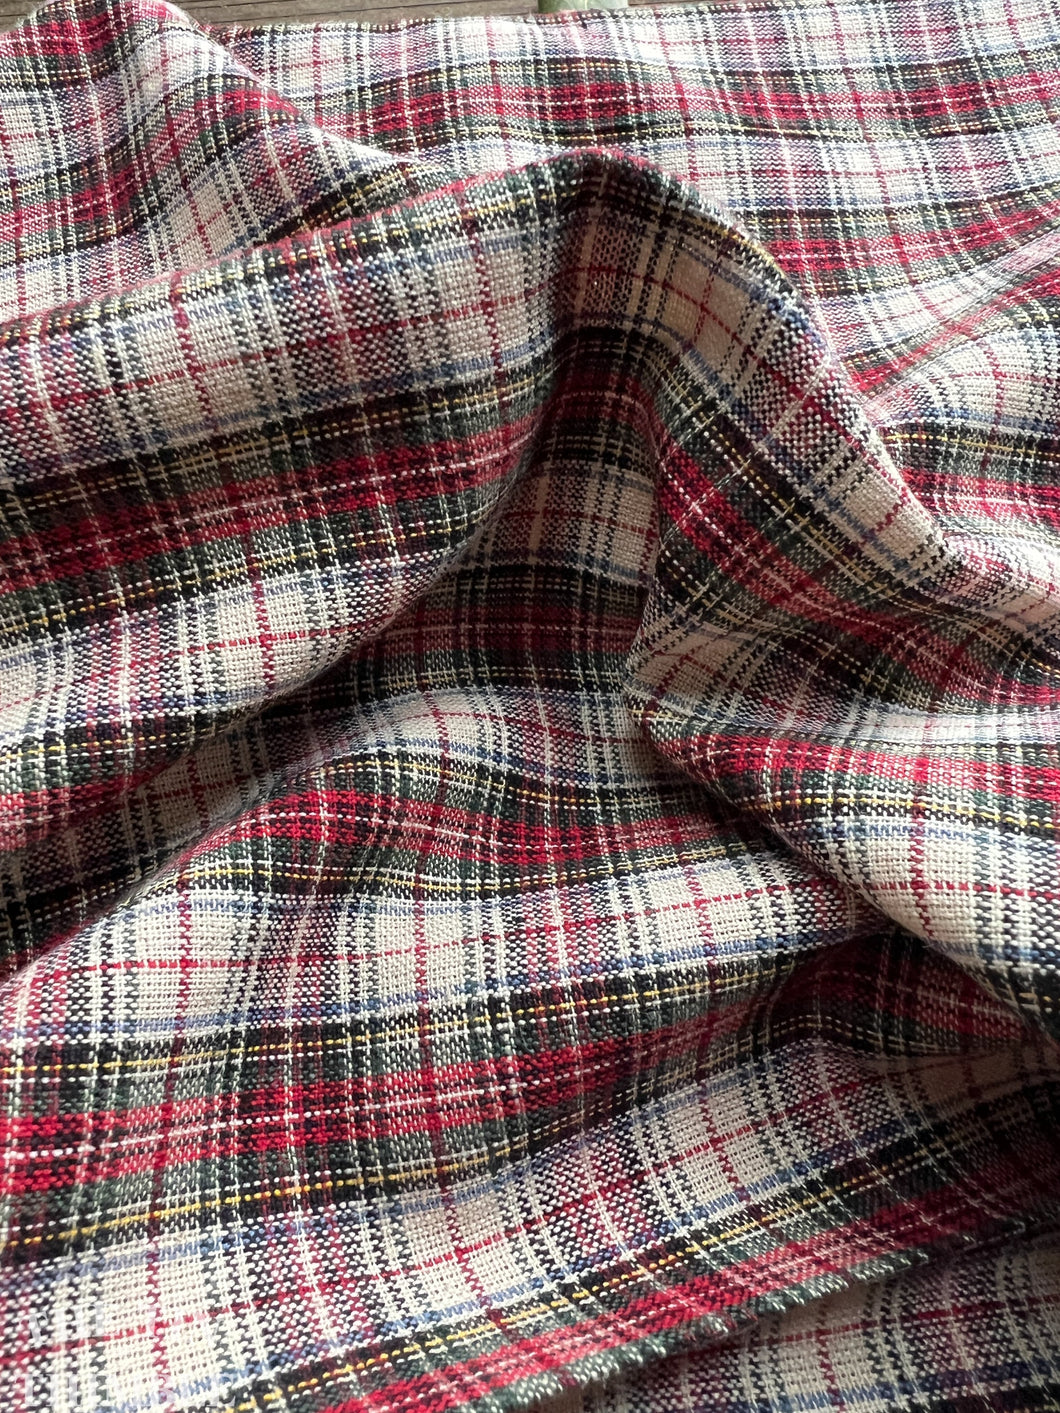 Yarn Dyed Plaid - Vintage 100% Cotton Small Red and Green Plaid Fabric - By the Yard